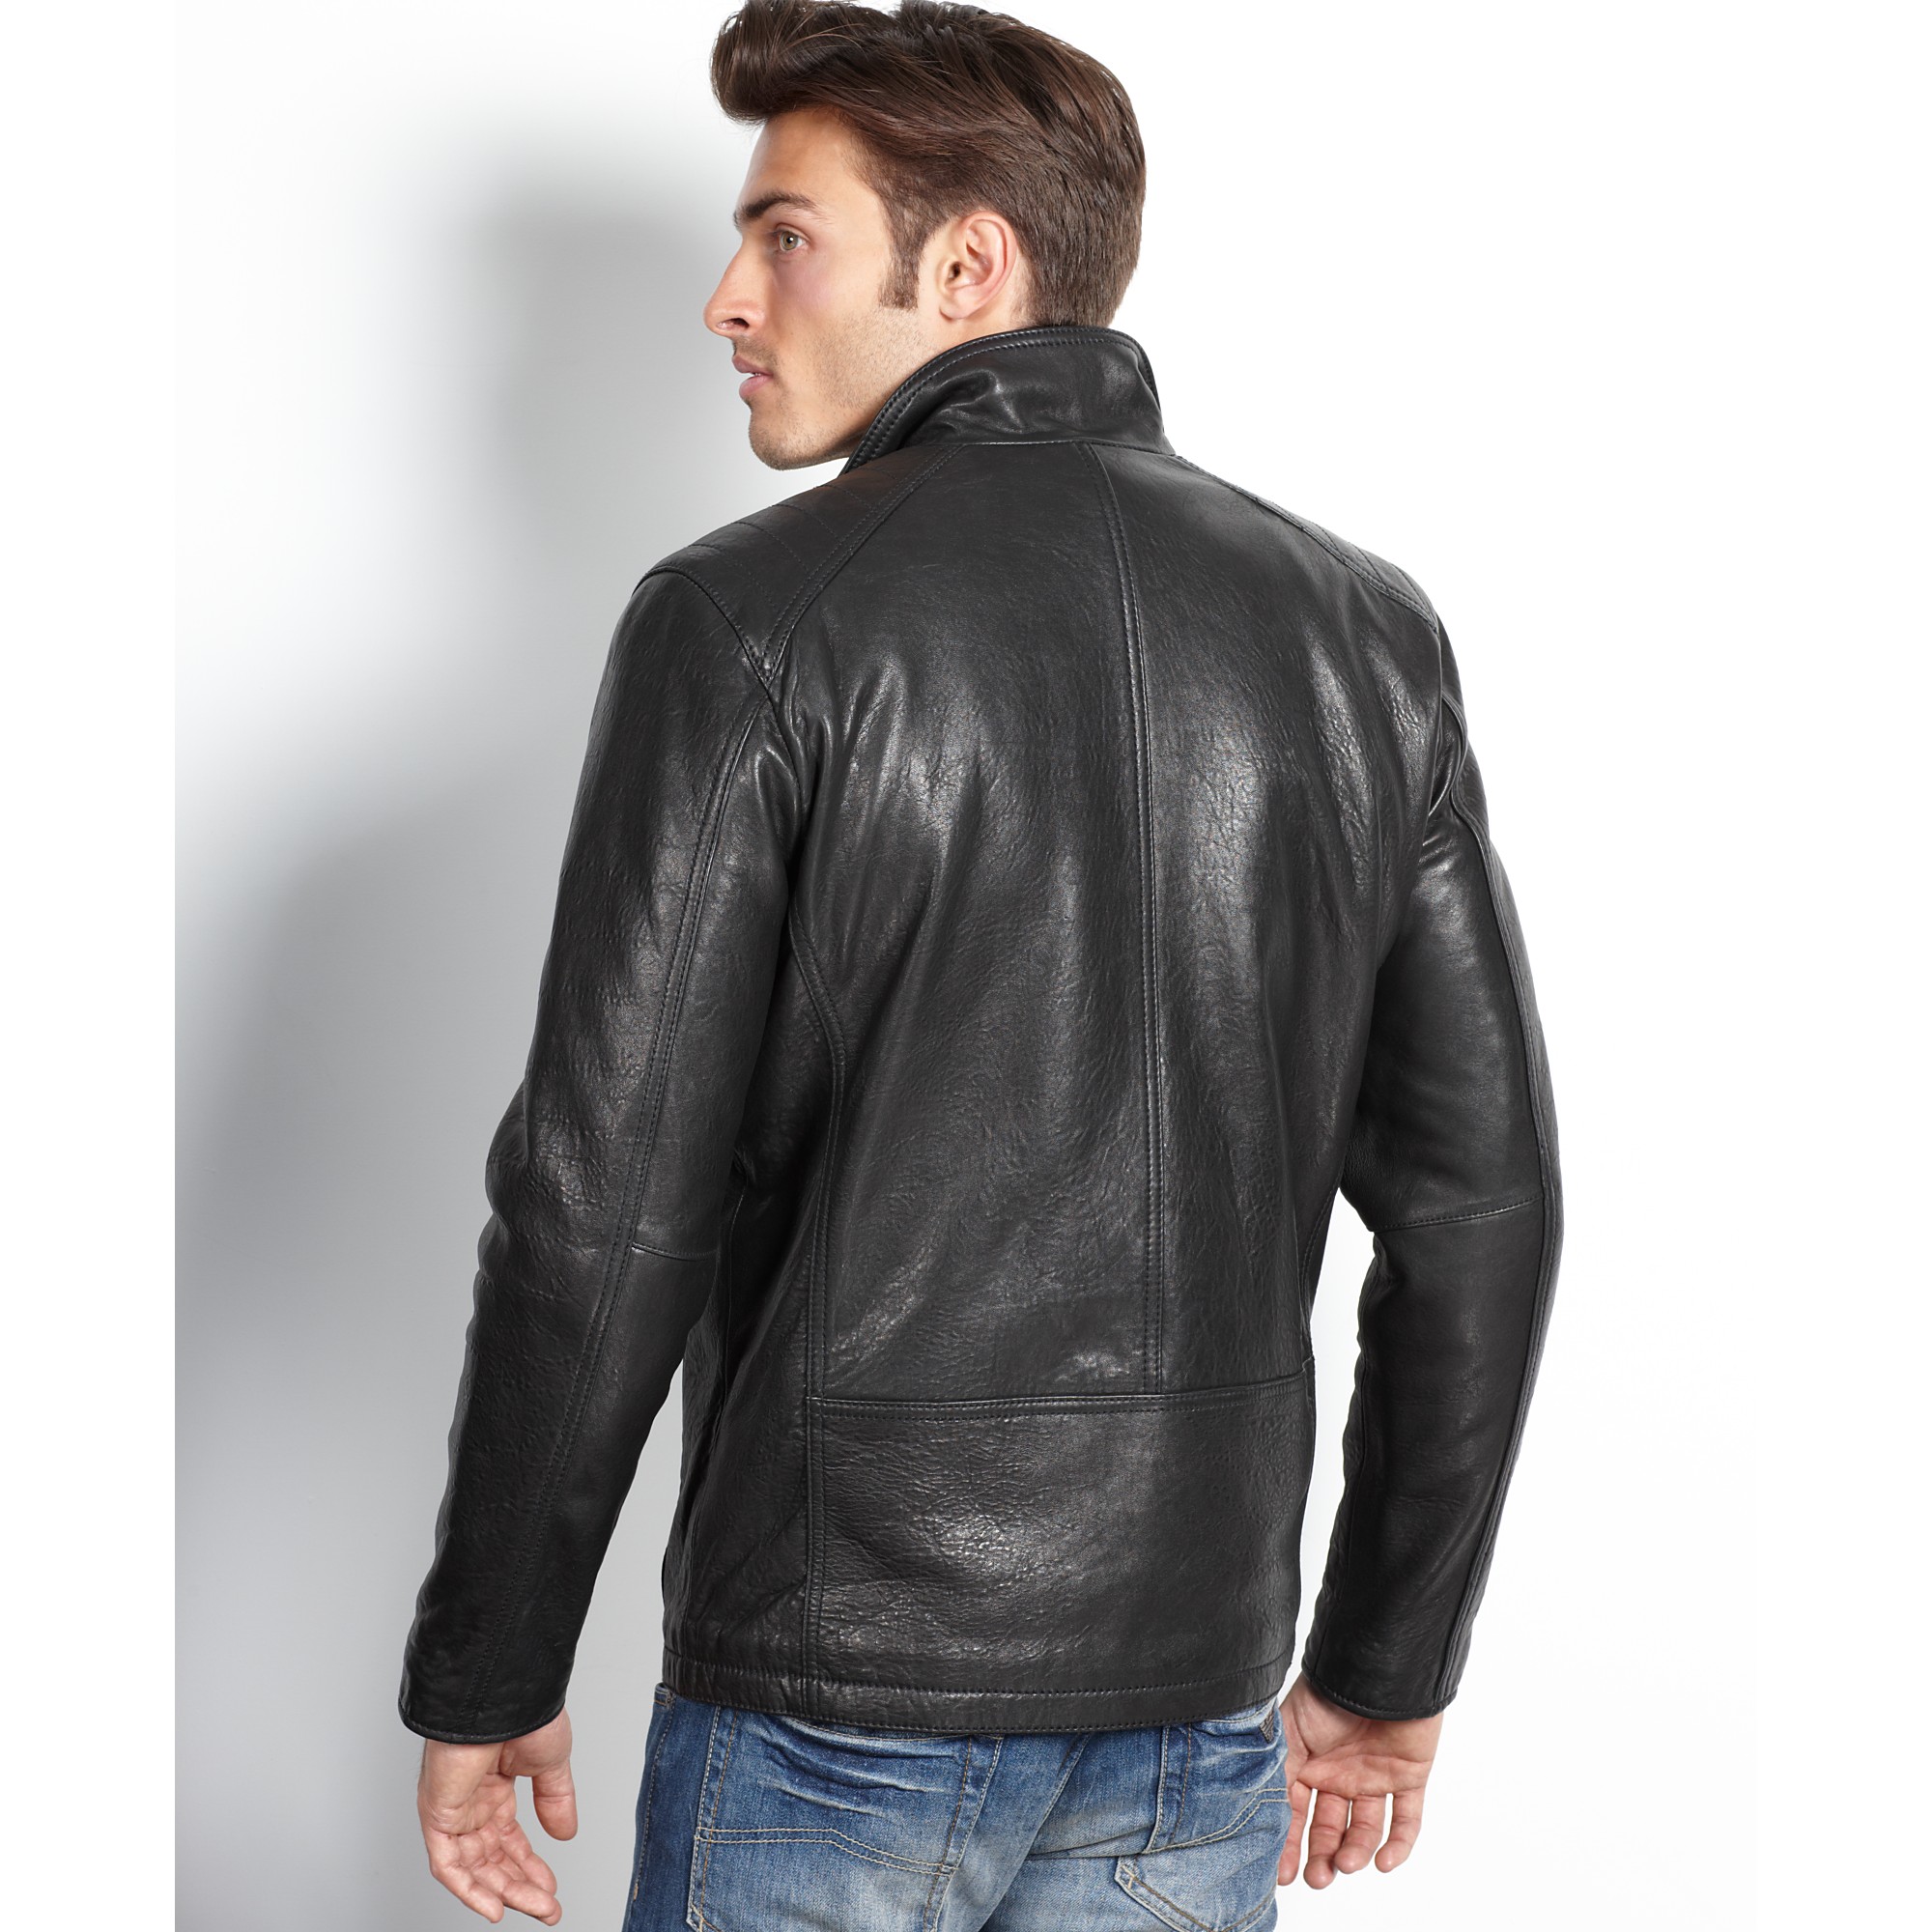 Marc New York Neptune Rugged Lamb Leather Jacket in Black for Men - Lyst